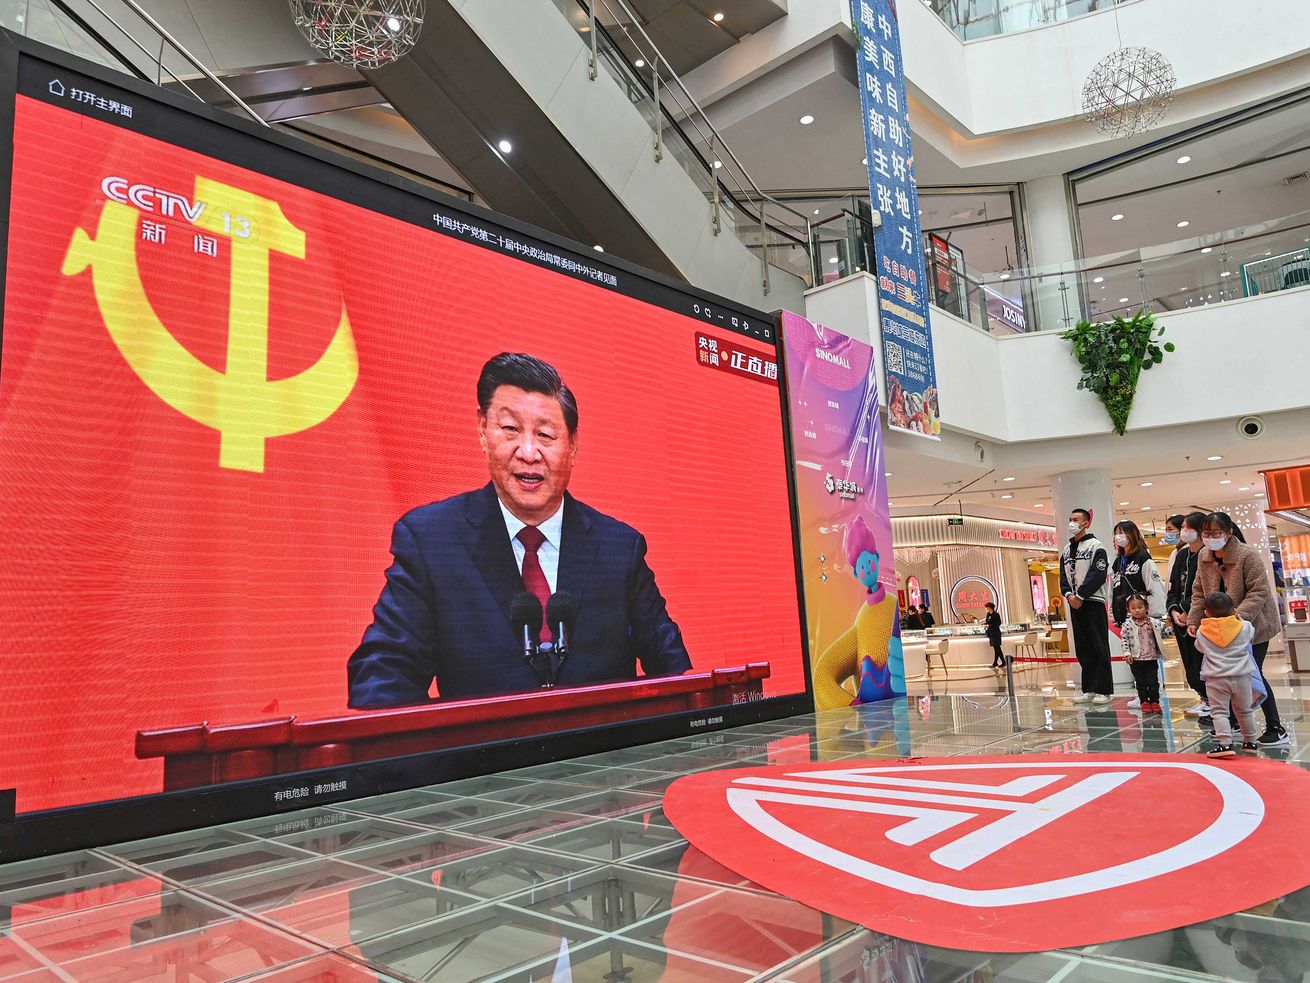 How Xi Jinping secured his third term in power — and quashed dissent